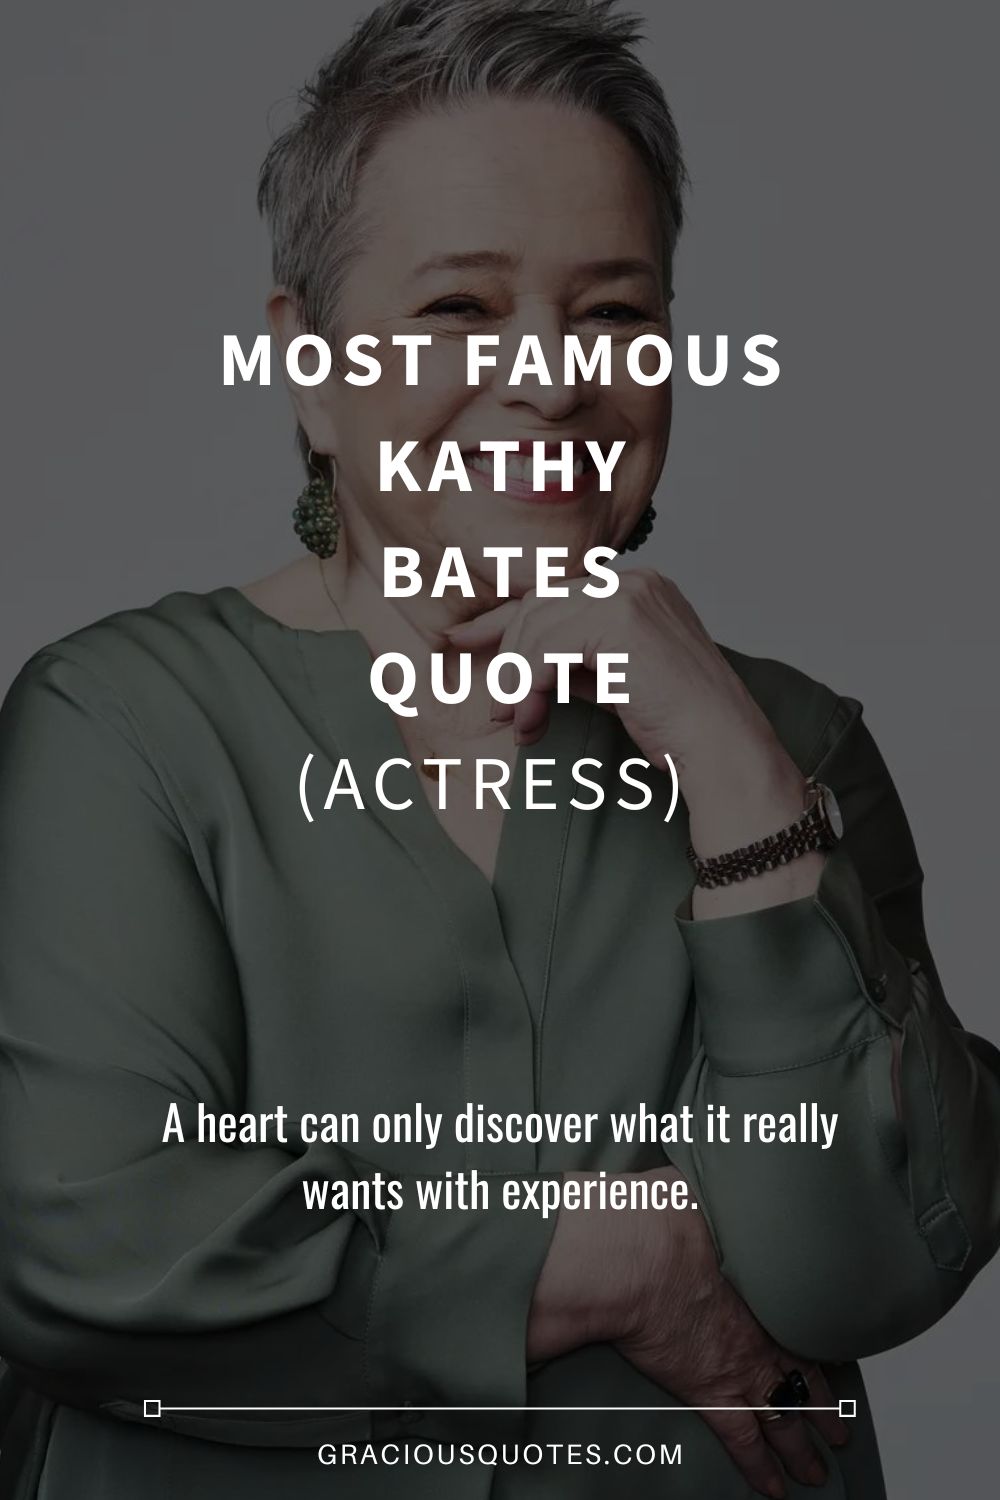 Most Famous Kathy Bates Quote (ACTRESS) - Gracious Quotes